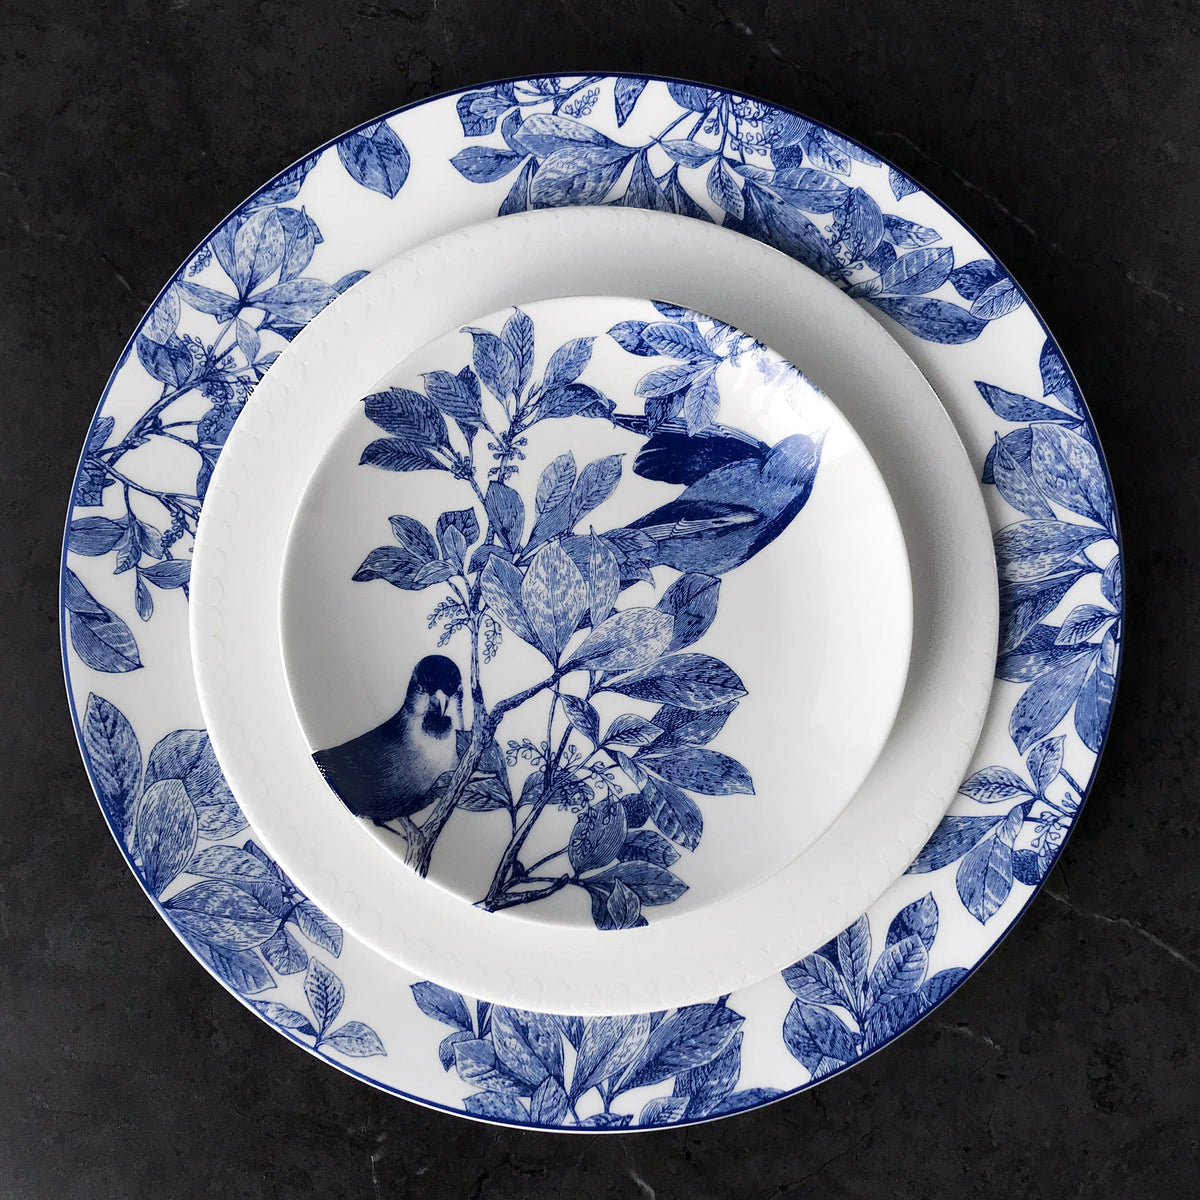 Two plates on a dark surface. The smaller plate is atop the larger one, both featuring a blue and white design with birds and botanical details. The plates are Arbor Blue Birds Small Plates by Caskata Artisanal Home.